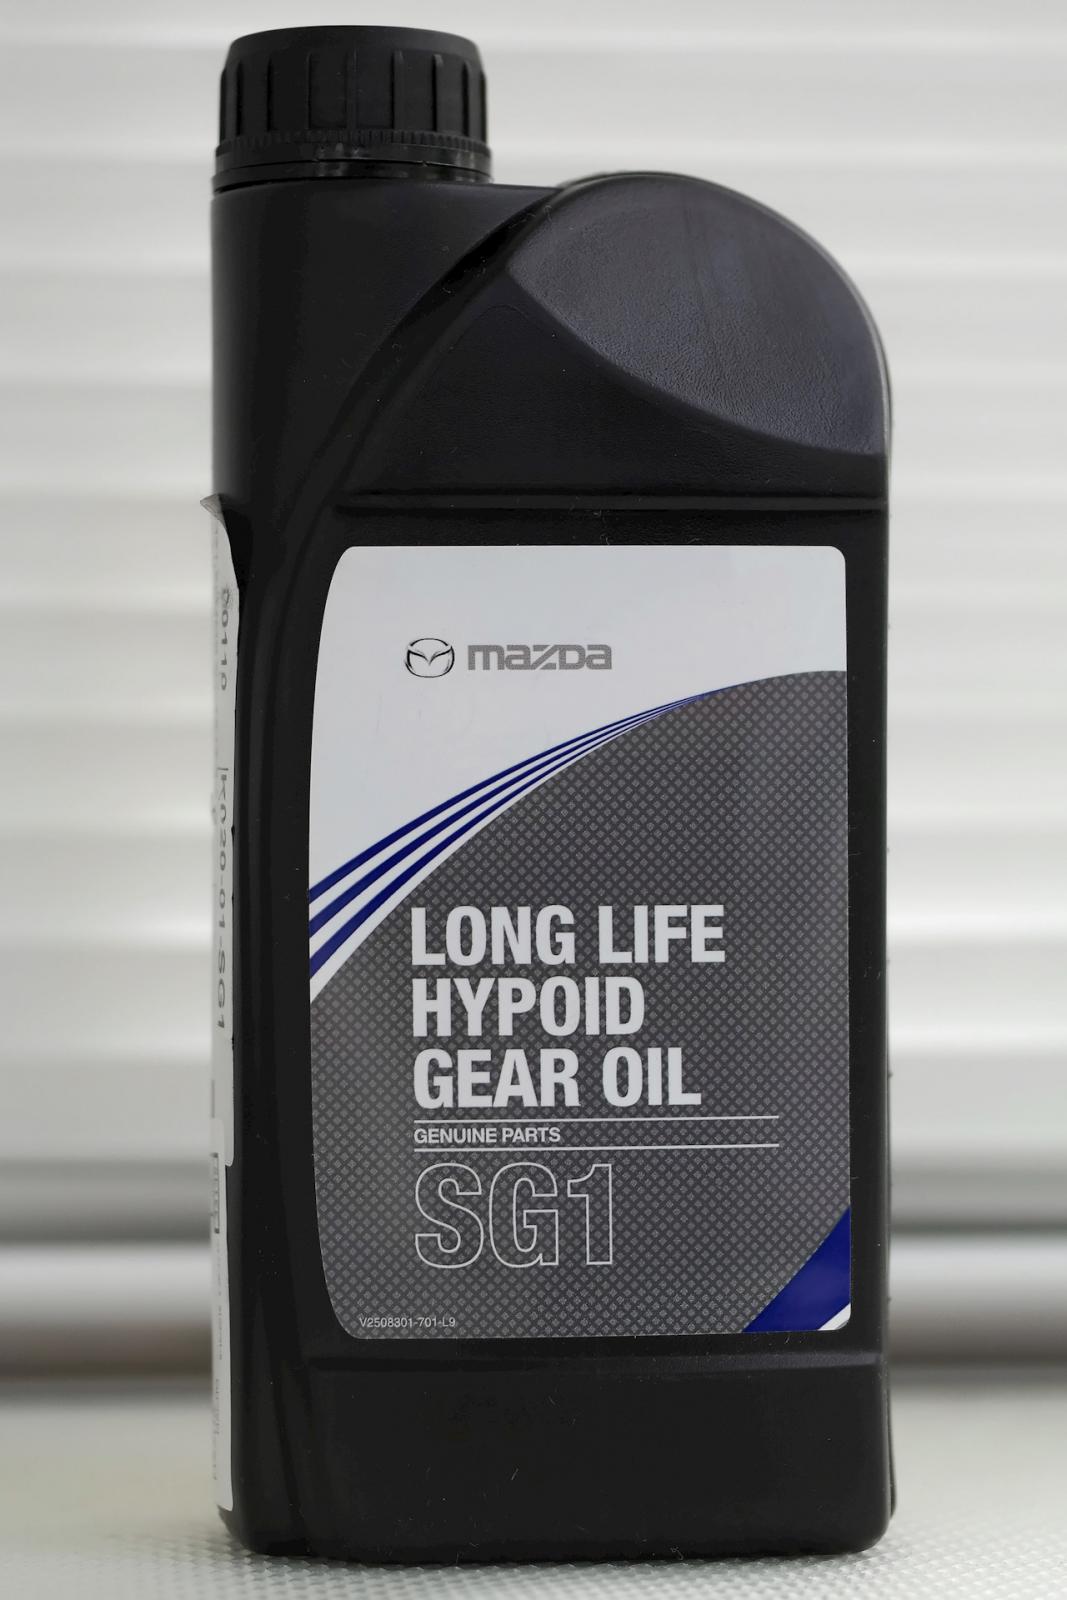 Масло в раздатку мазда сх5. Mazda long Life Hypoid Gear Oil sg1. Hypoid Gear Oil sg1 Mazda. Sg1 масло трансмиссионное. Mazda long Life Hypoid Gear Oil sg1 спецификация.